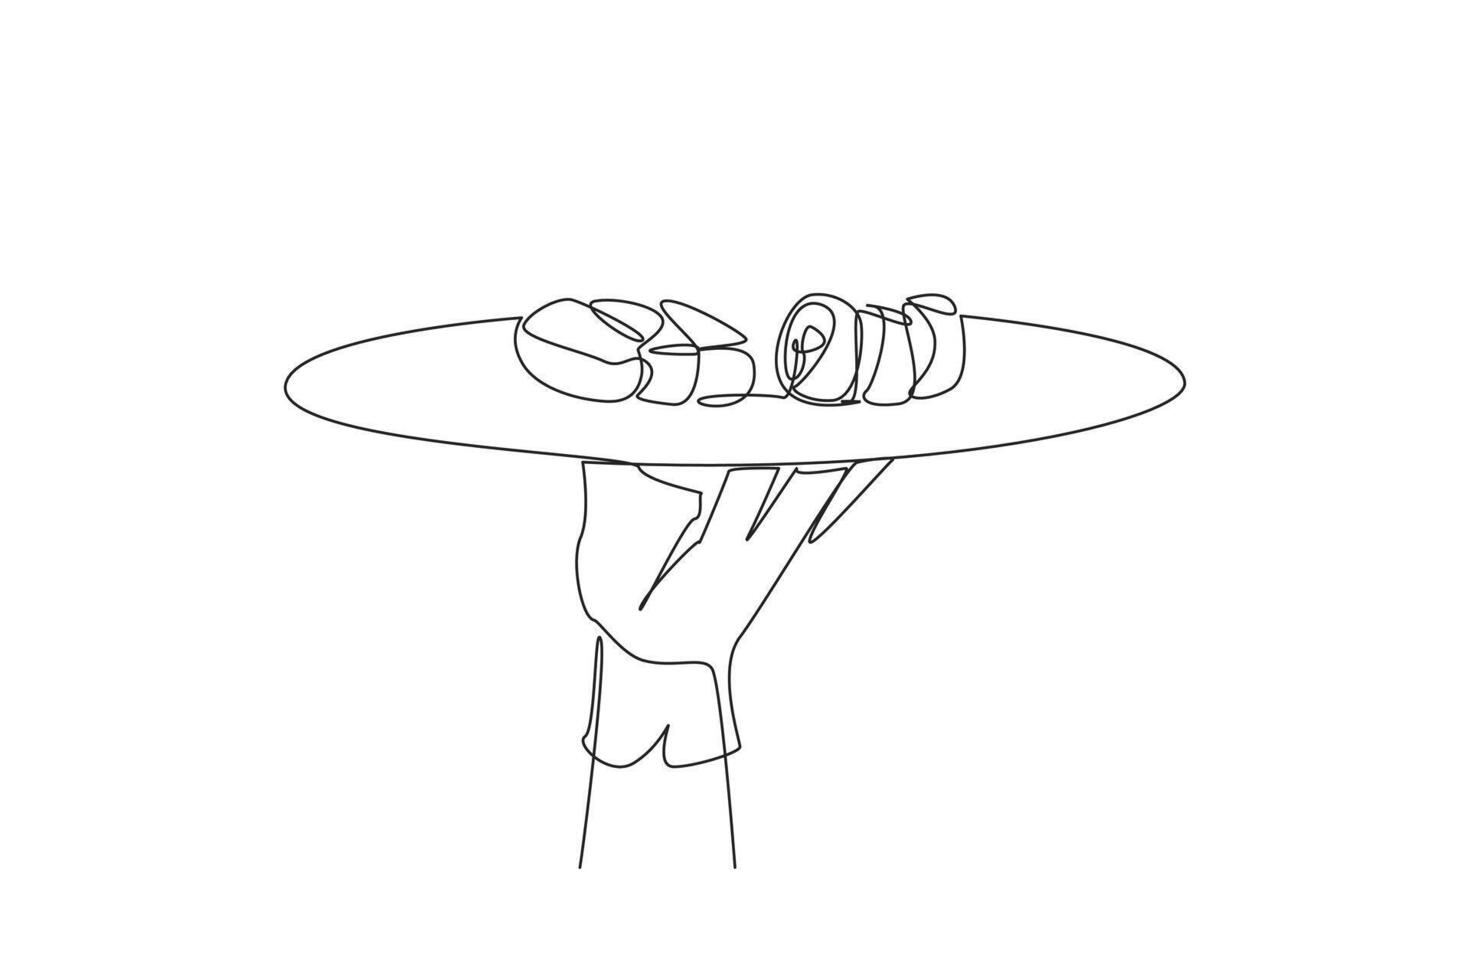 Single continuous line drawing waiter holding food tray serving sushi. Fish and vegetables wrapped in rice and mixed with vinegar. Typical food from Asia. Seafood. One line design illustration vector